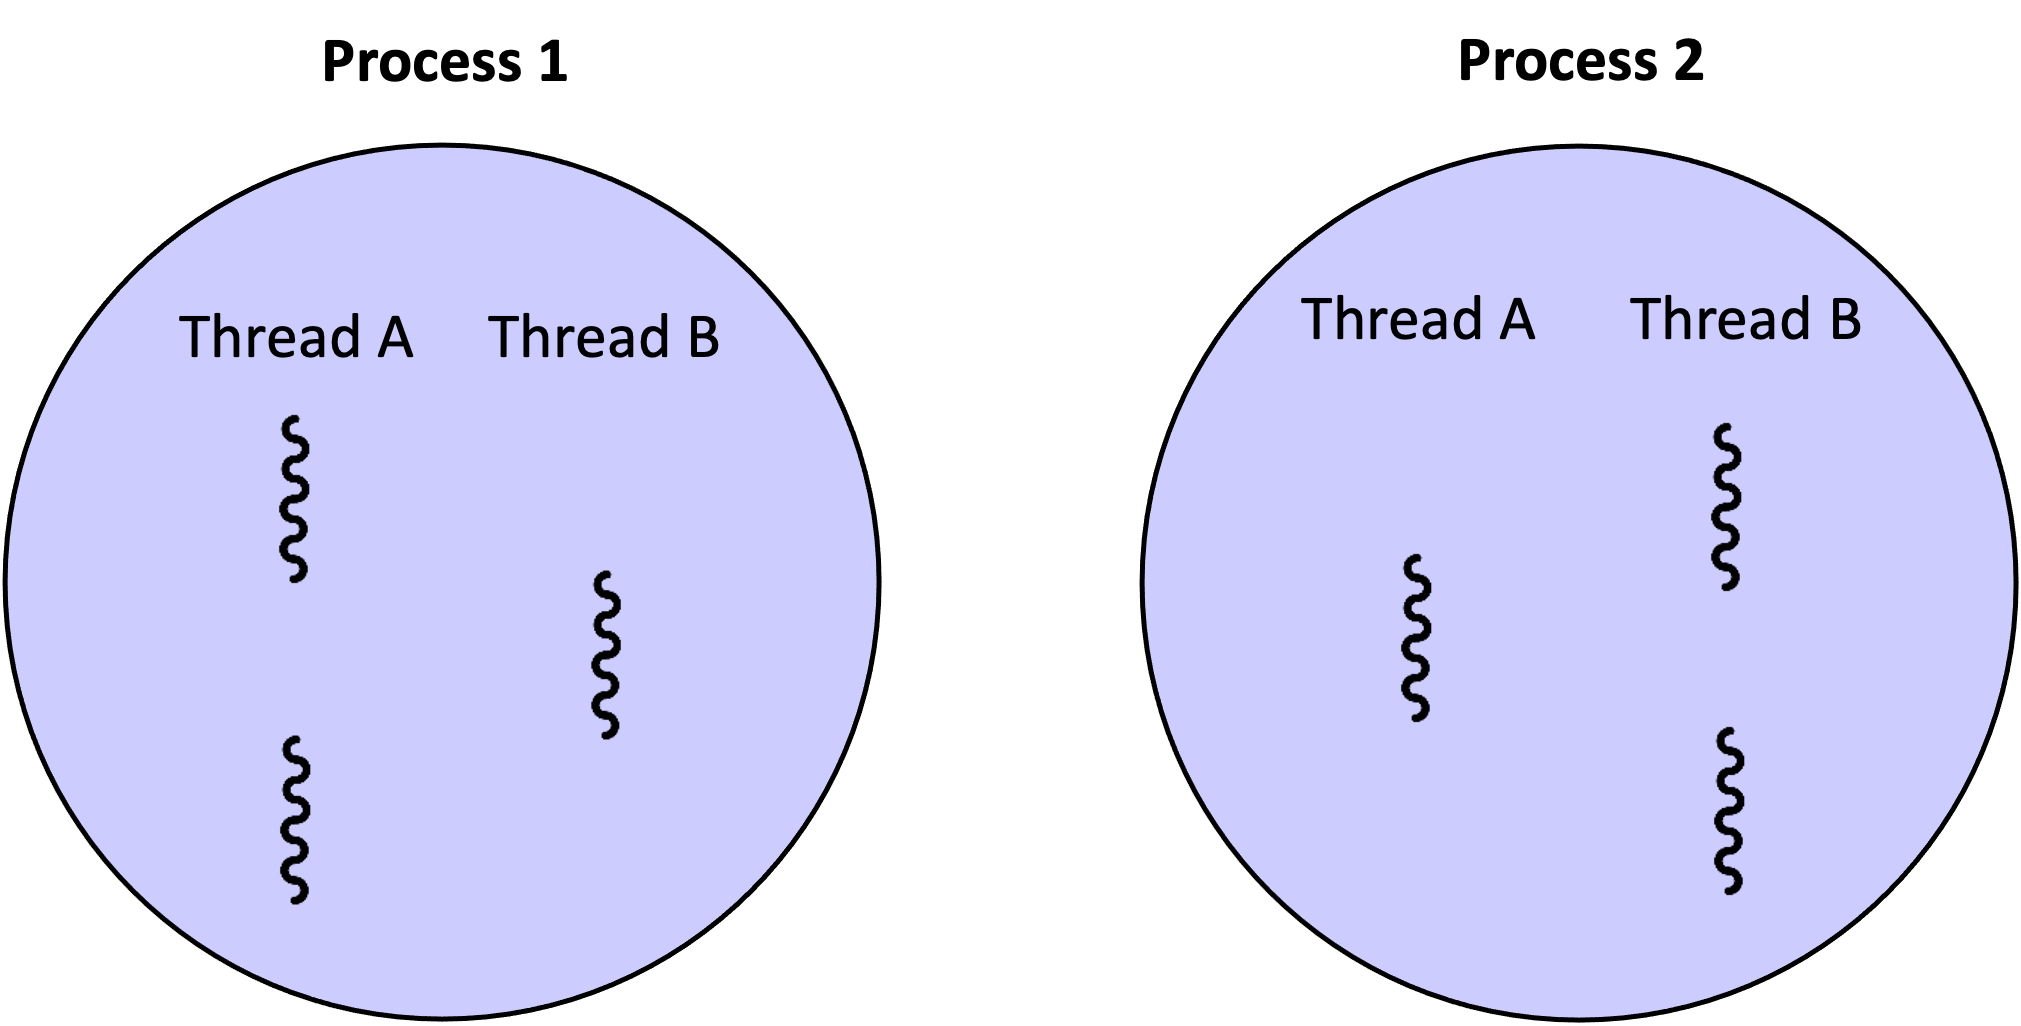 Fig. 2. Two processes executing multiple concurrent threads